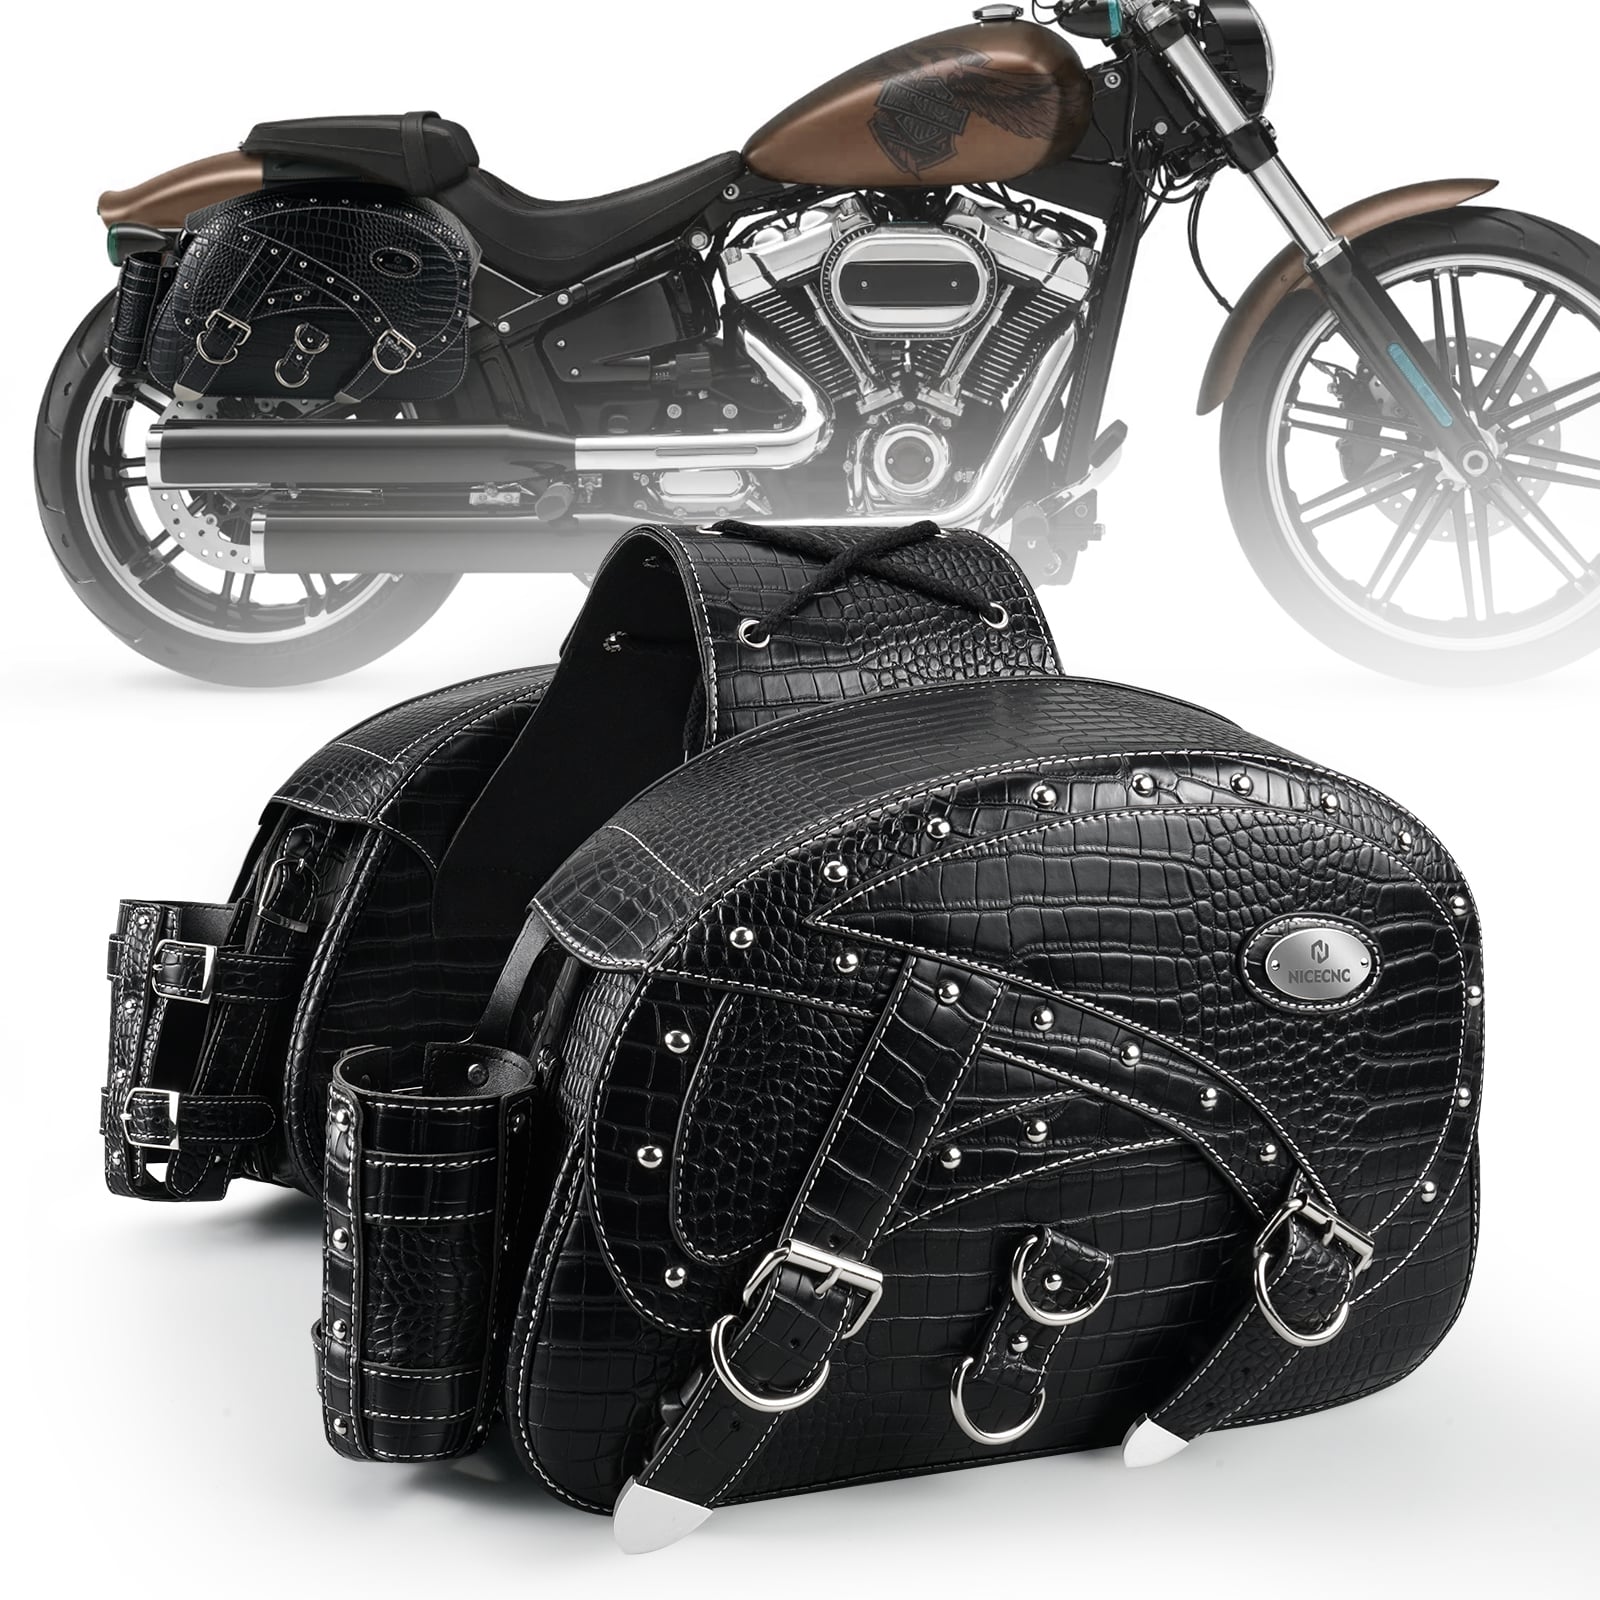 Motorcycle Saddlebags 35L Heavy Duty Leather Waterproof with Cup Holders For Cruiser Softail Dyna Road King